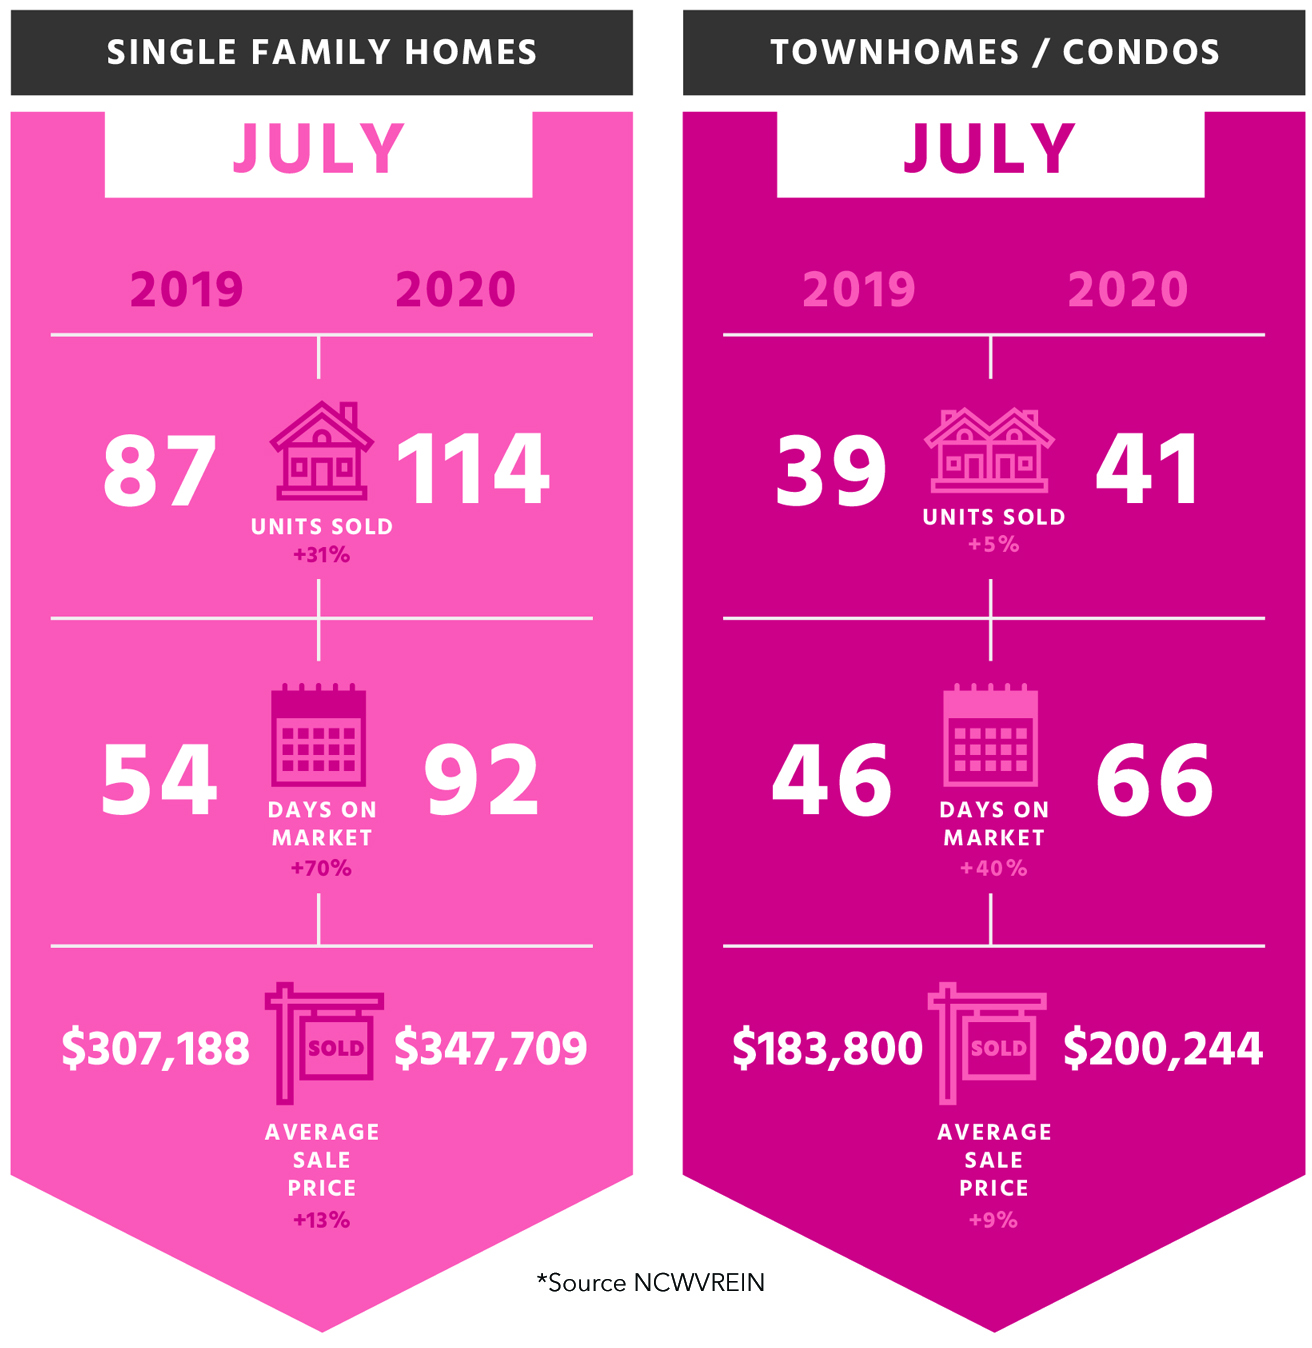 Average sale price of single family homes and townhomes/condos from 2019 vs 2020 for the month of july.